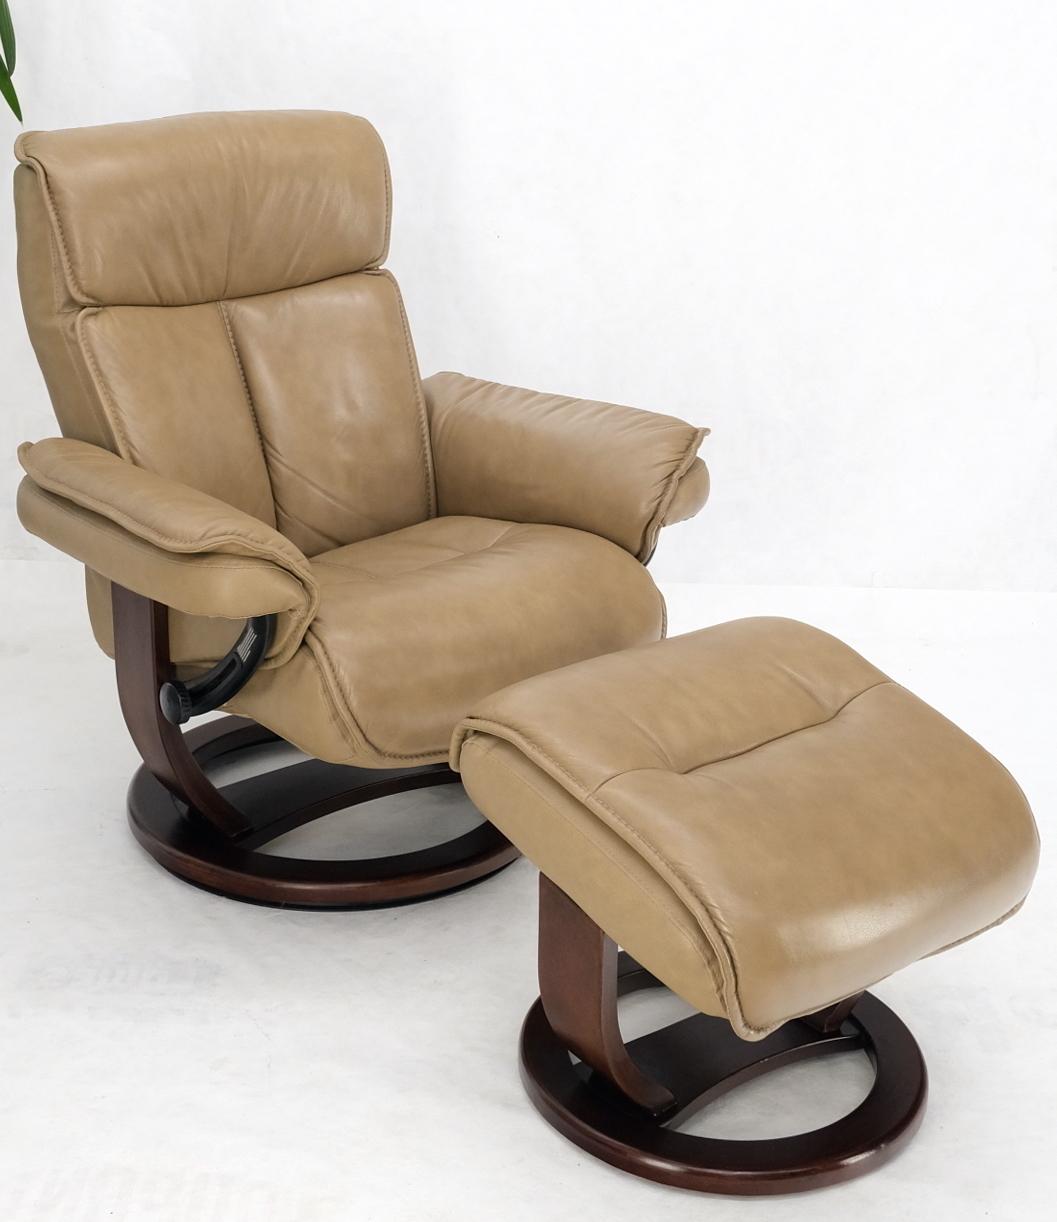 Danish modern design adjustable recliner chair with ottoman by Thomasville. the ottoman is 20x20x19.